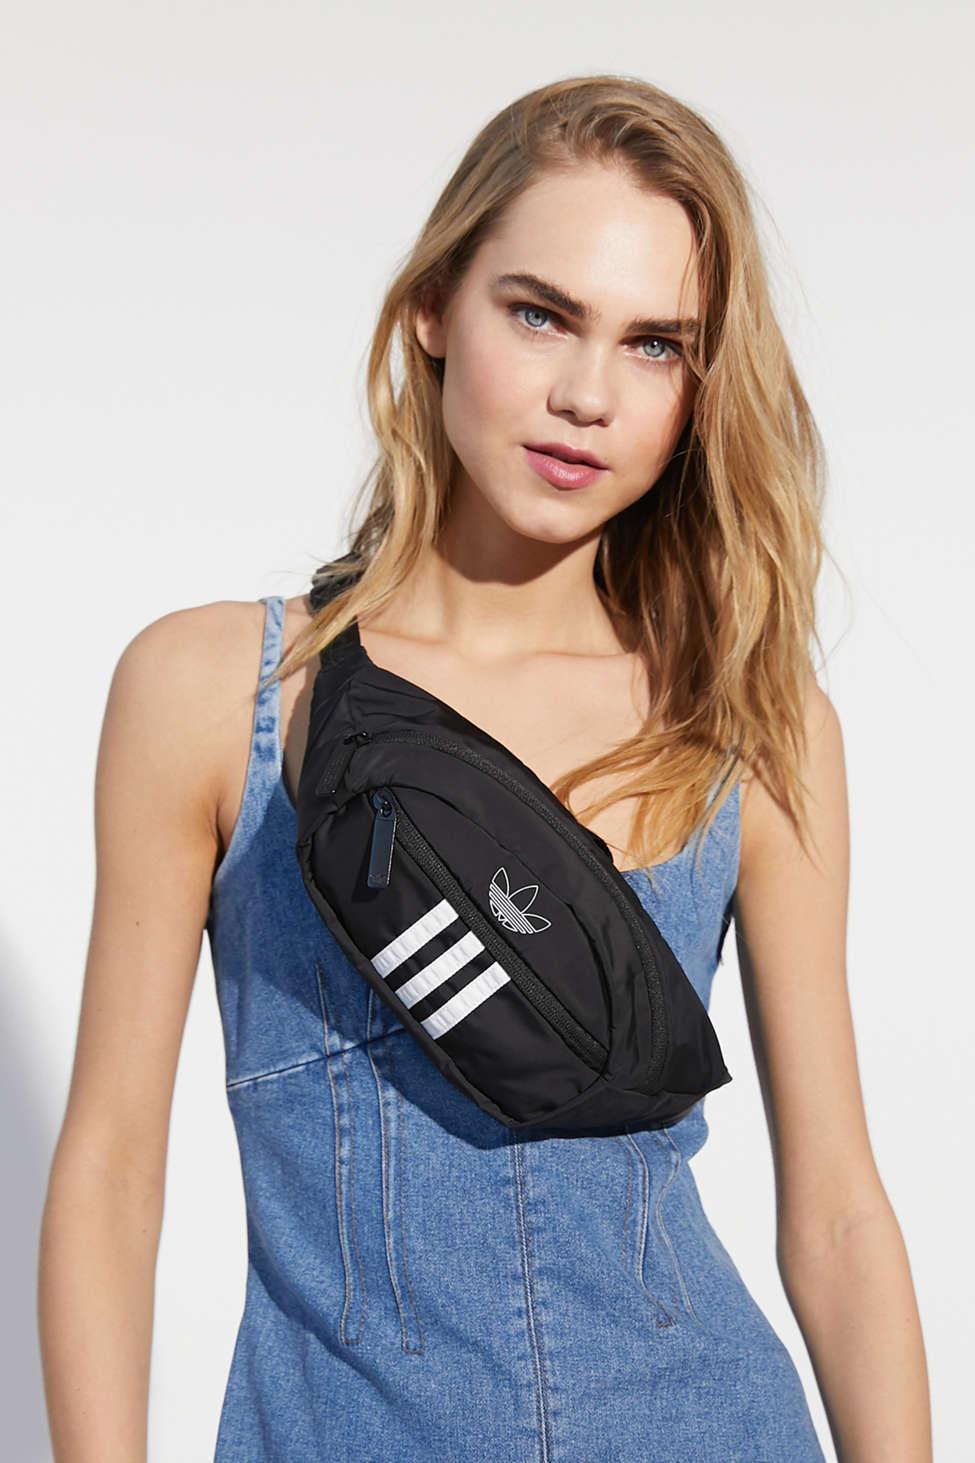 adidas Originals Synthetic National 3-stripes Waistpack in Black/White  (Black) - Lyst